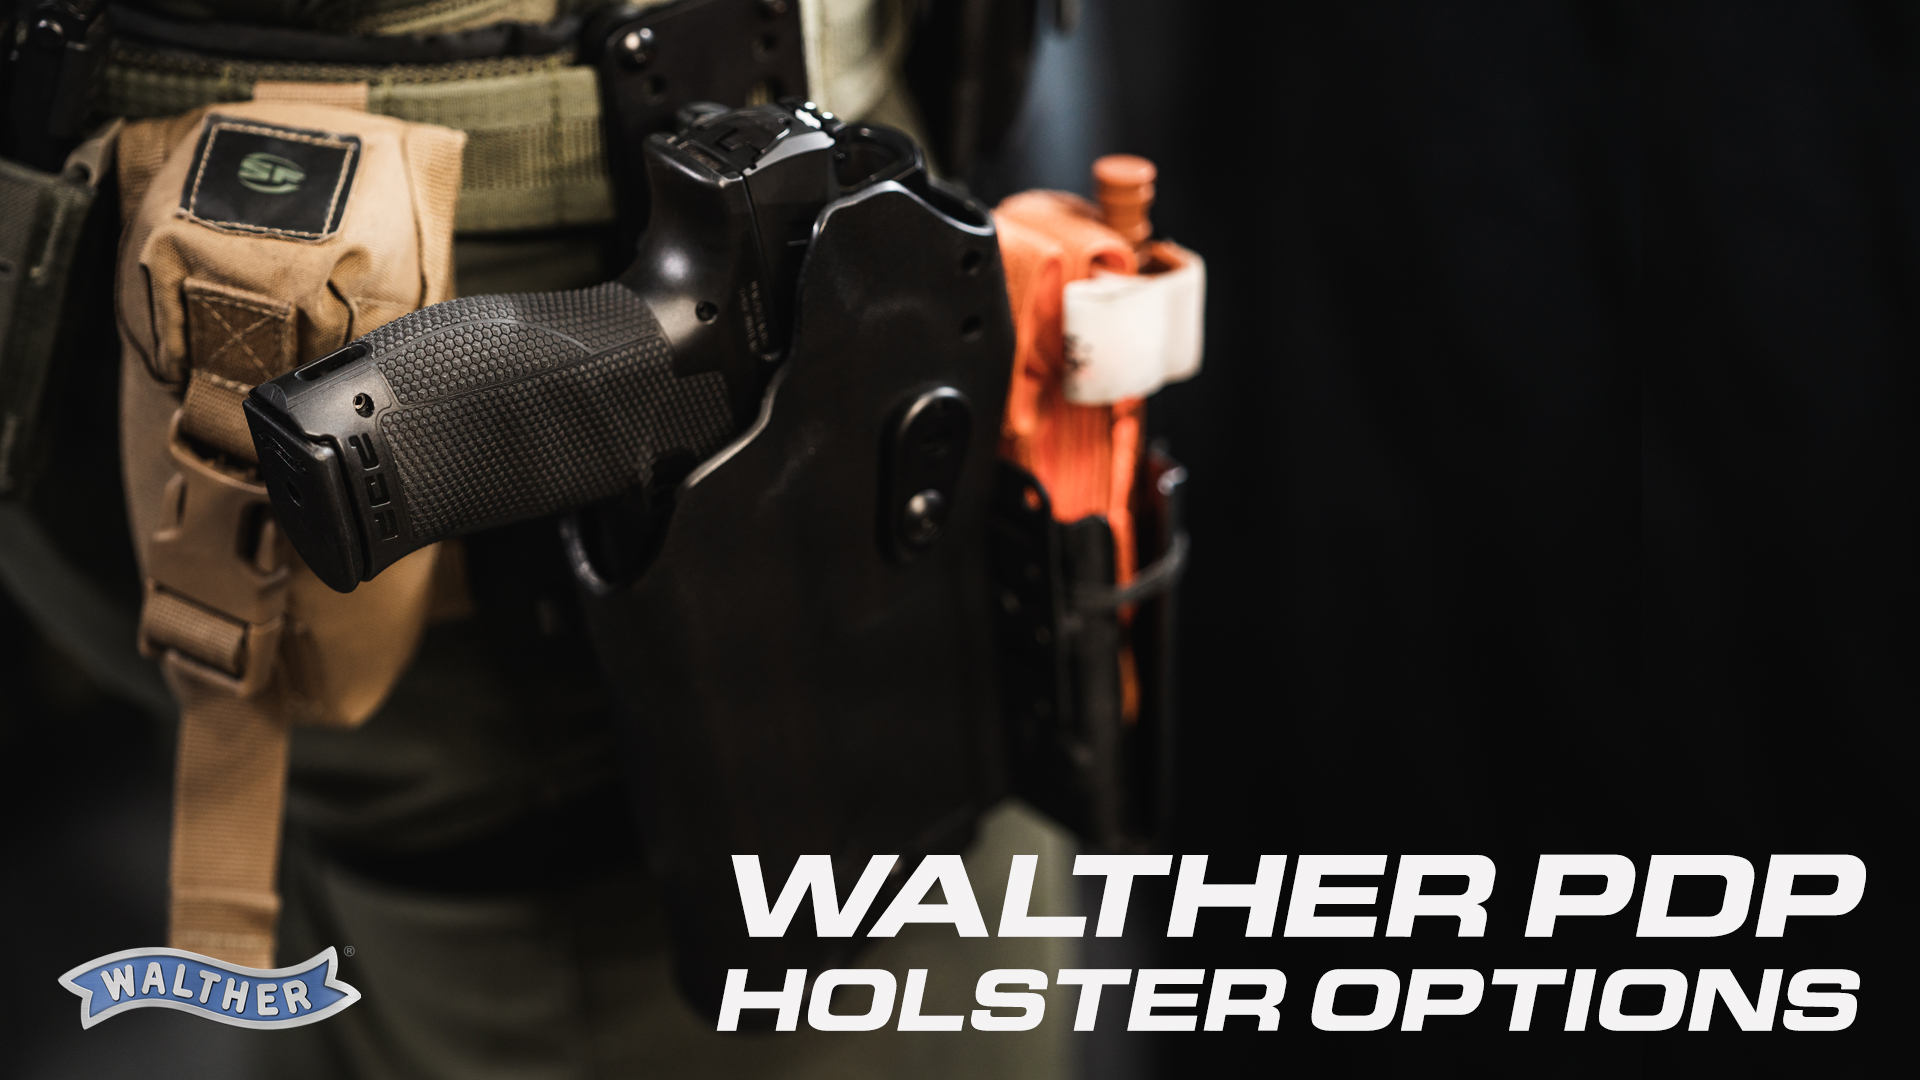 Police Duty or Off Duty Magazine Holster - C.T. Designs